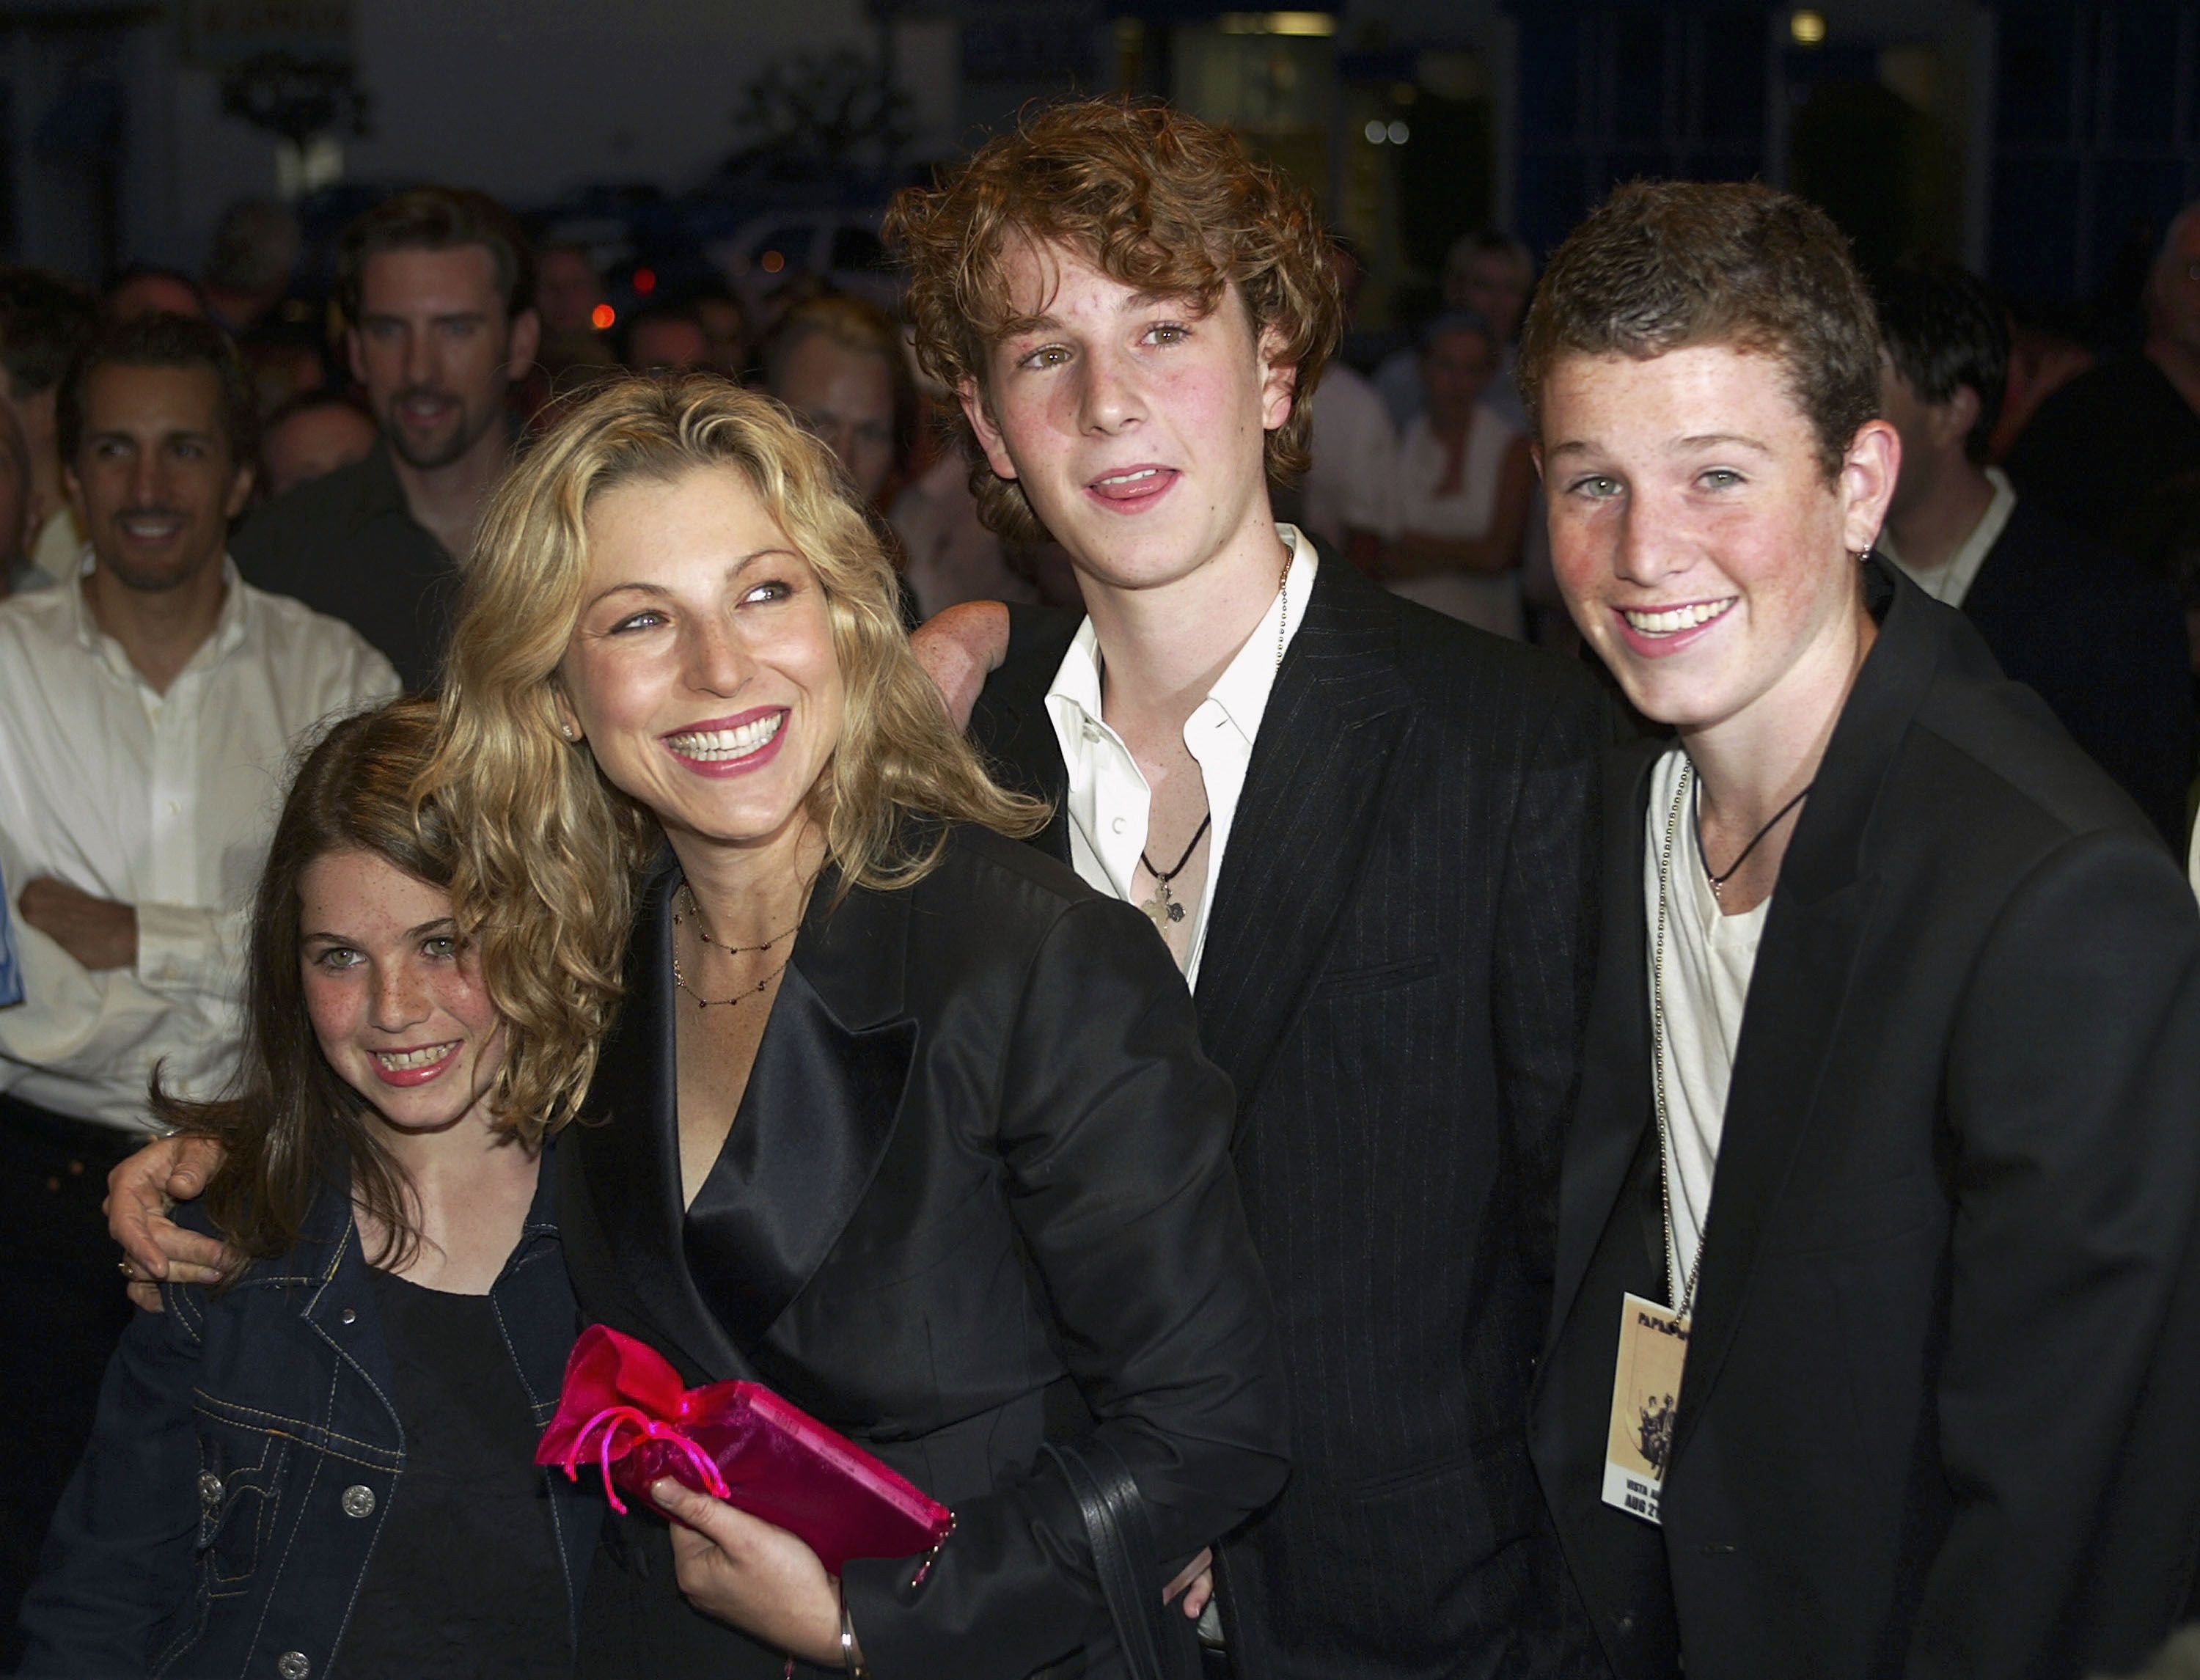 Tatum O'Neal and her children Emily, Kevin and Sean McEnroe at the 30th anniversary screening of "Paper Moon" in 2003 in Los Angeles | Source: Getty Images